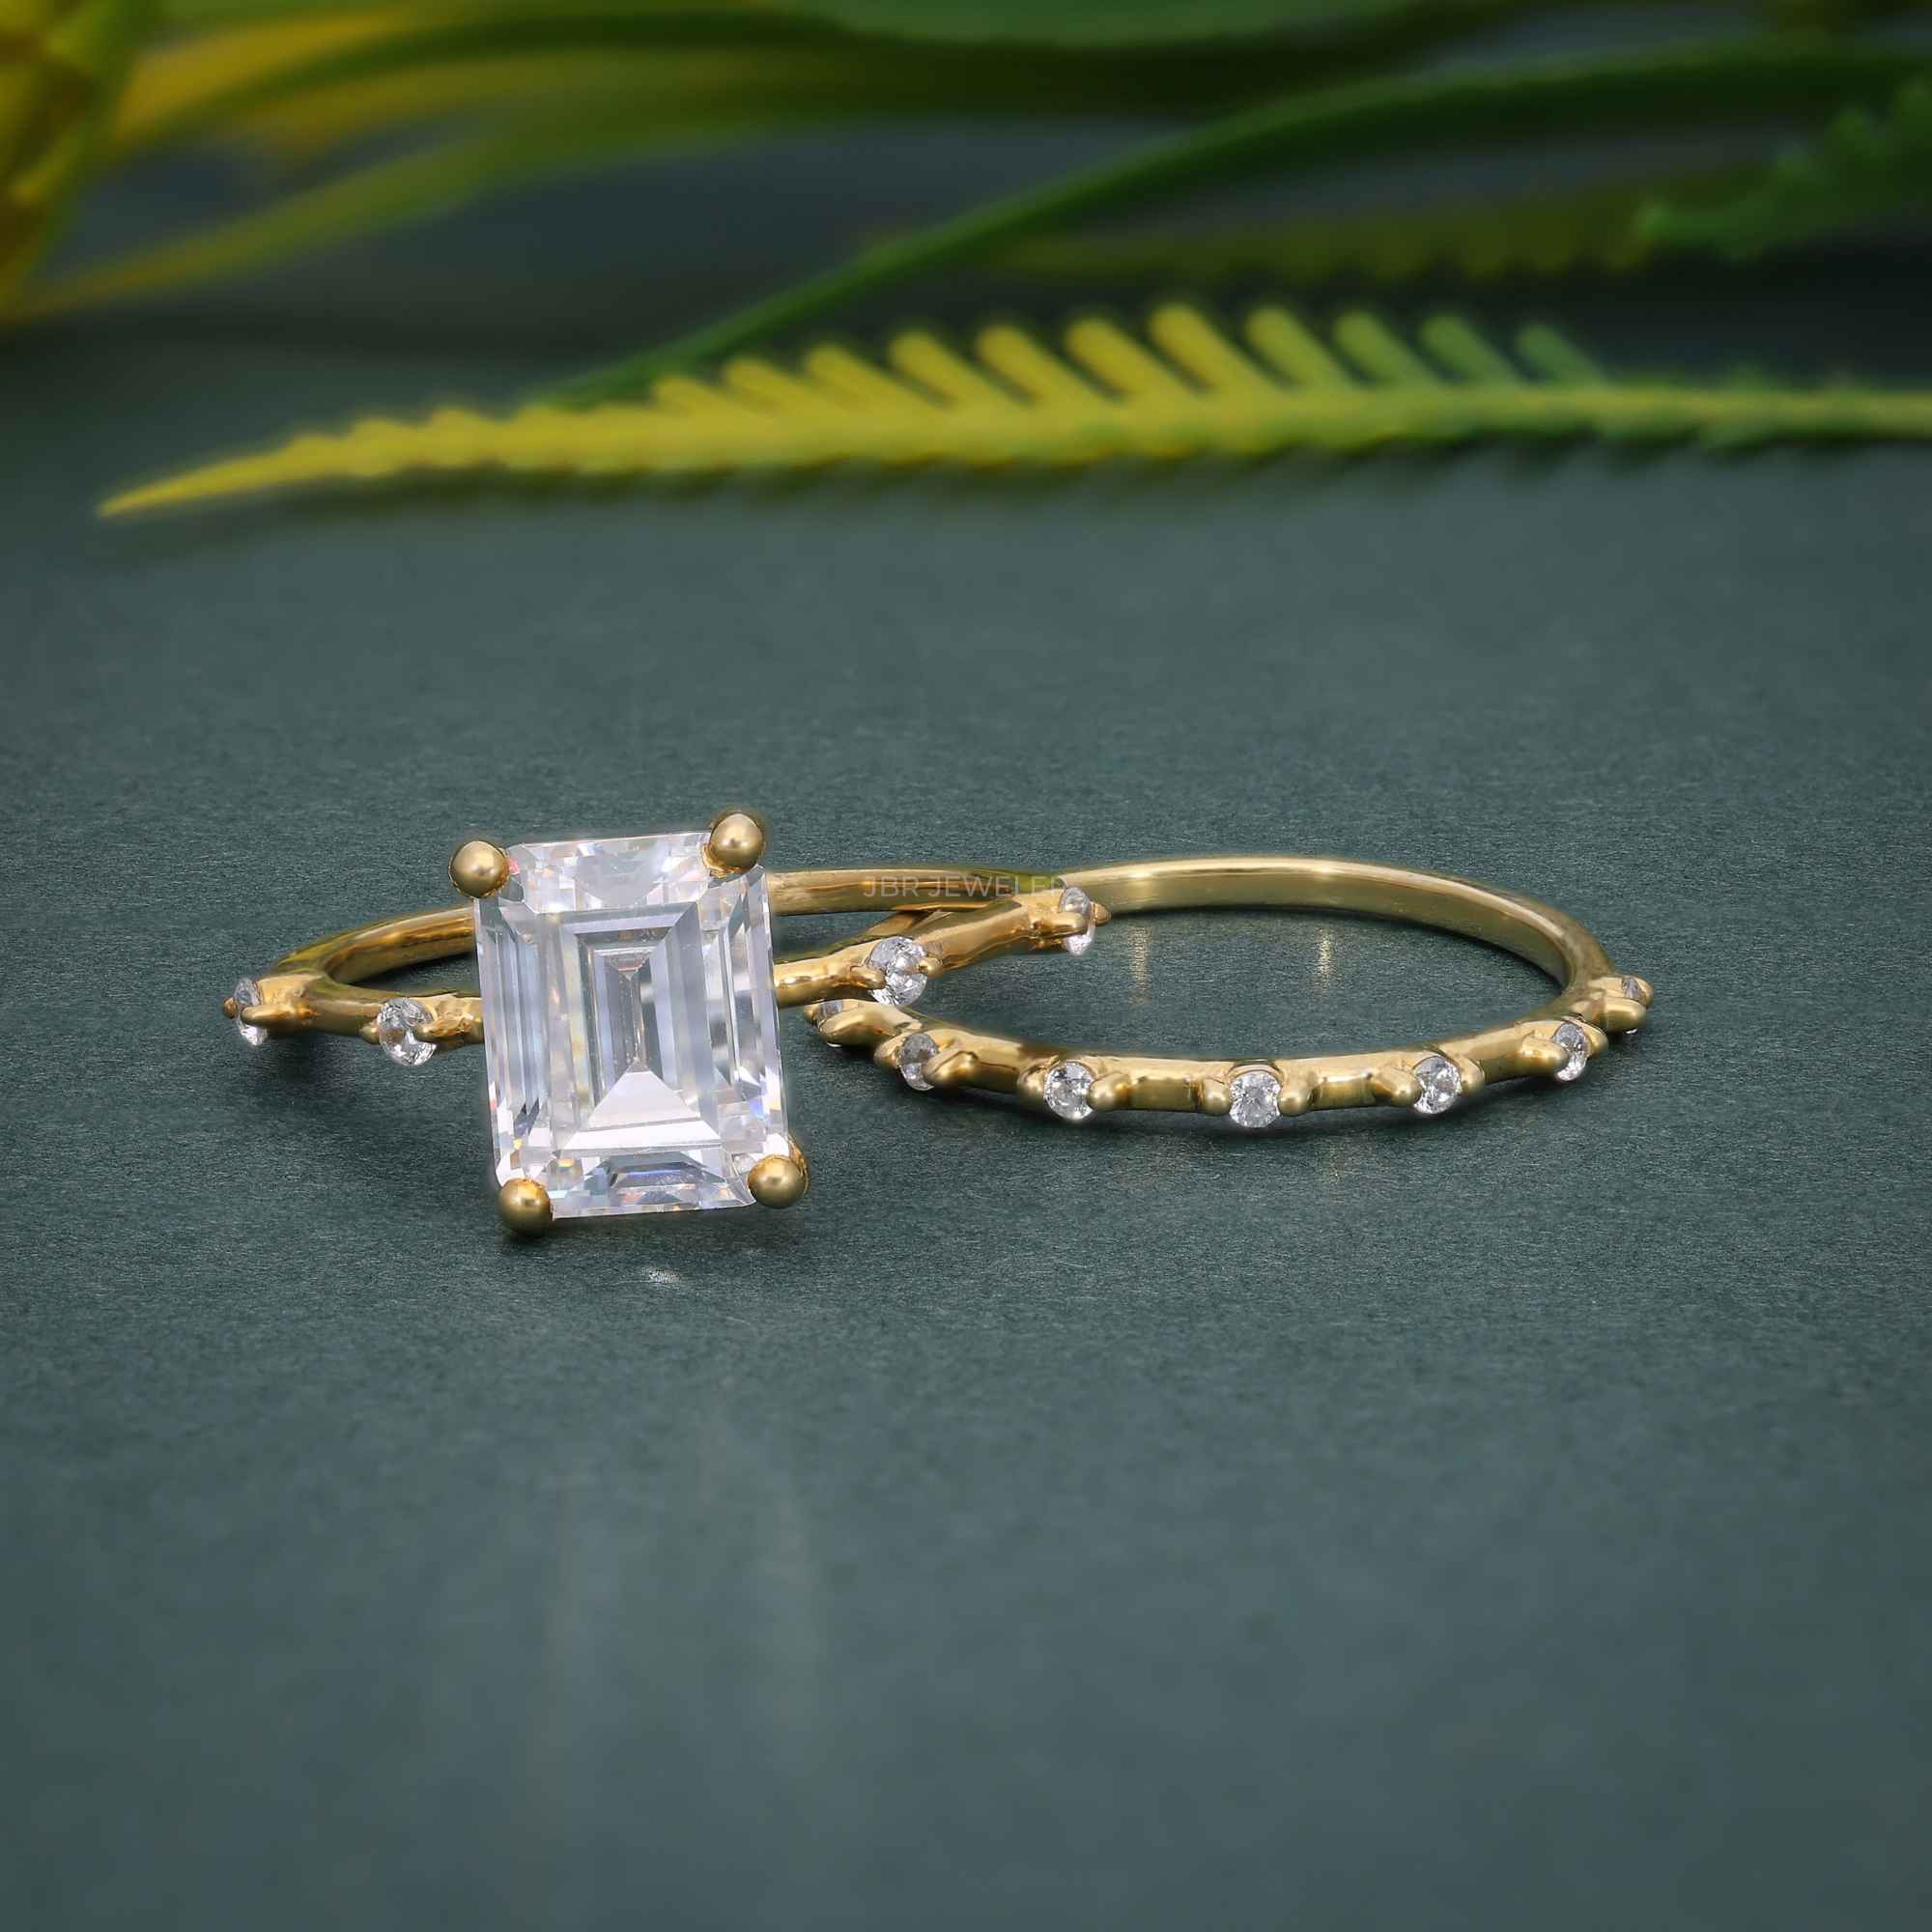 Emerald Cut Moissanite Engagement Ring With Matching Bridal Ring Set